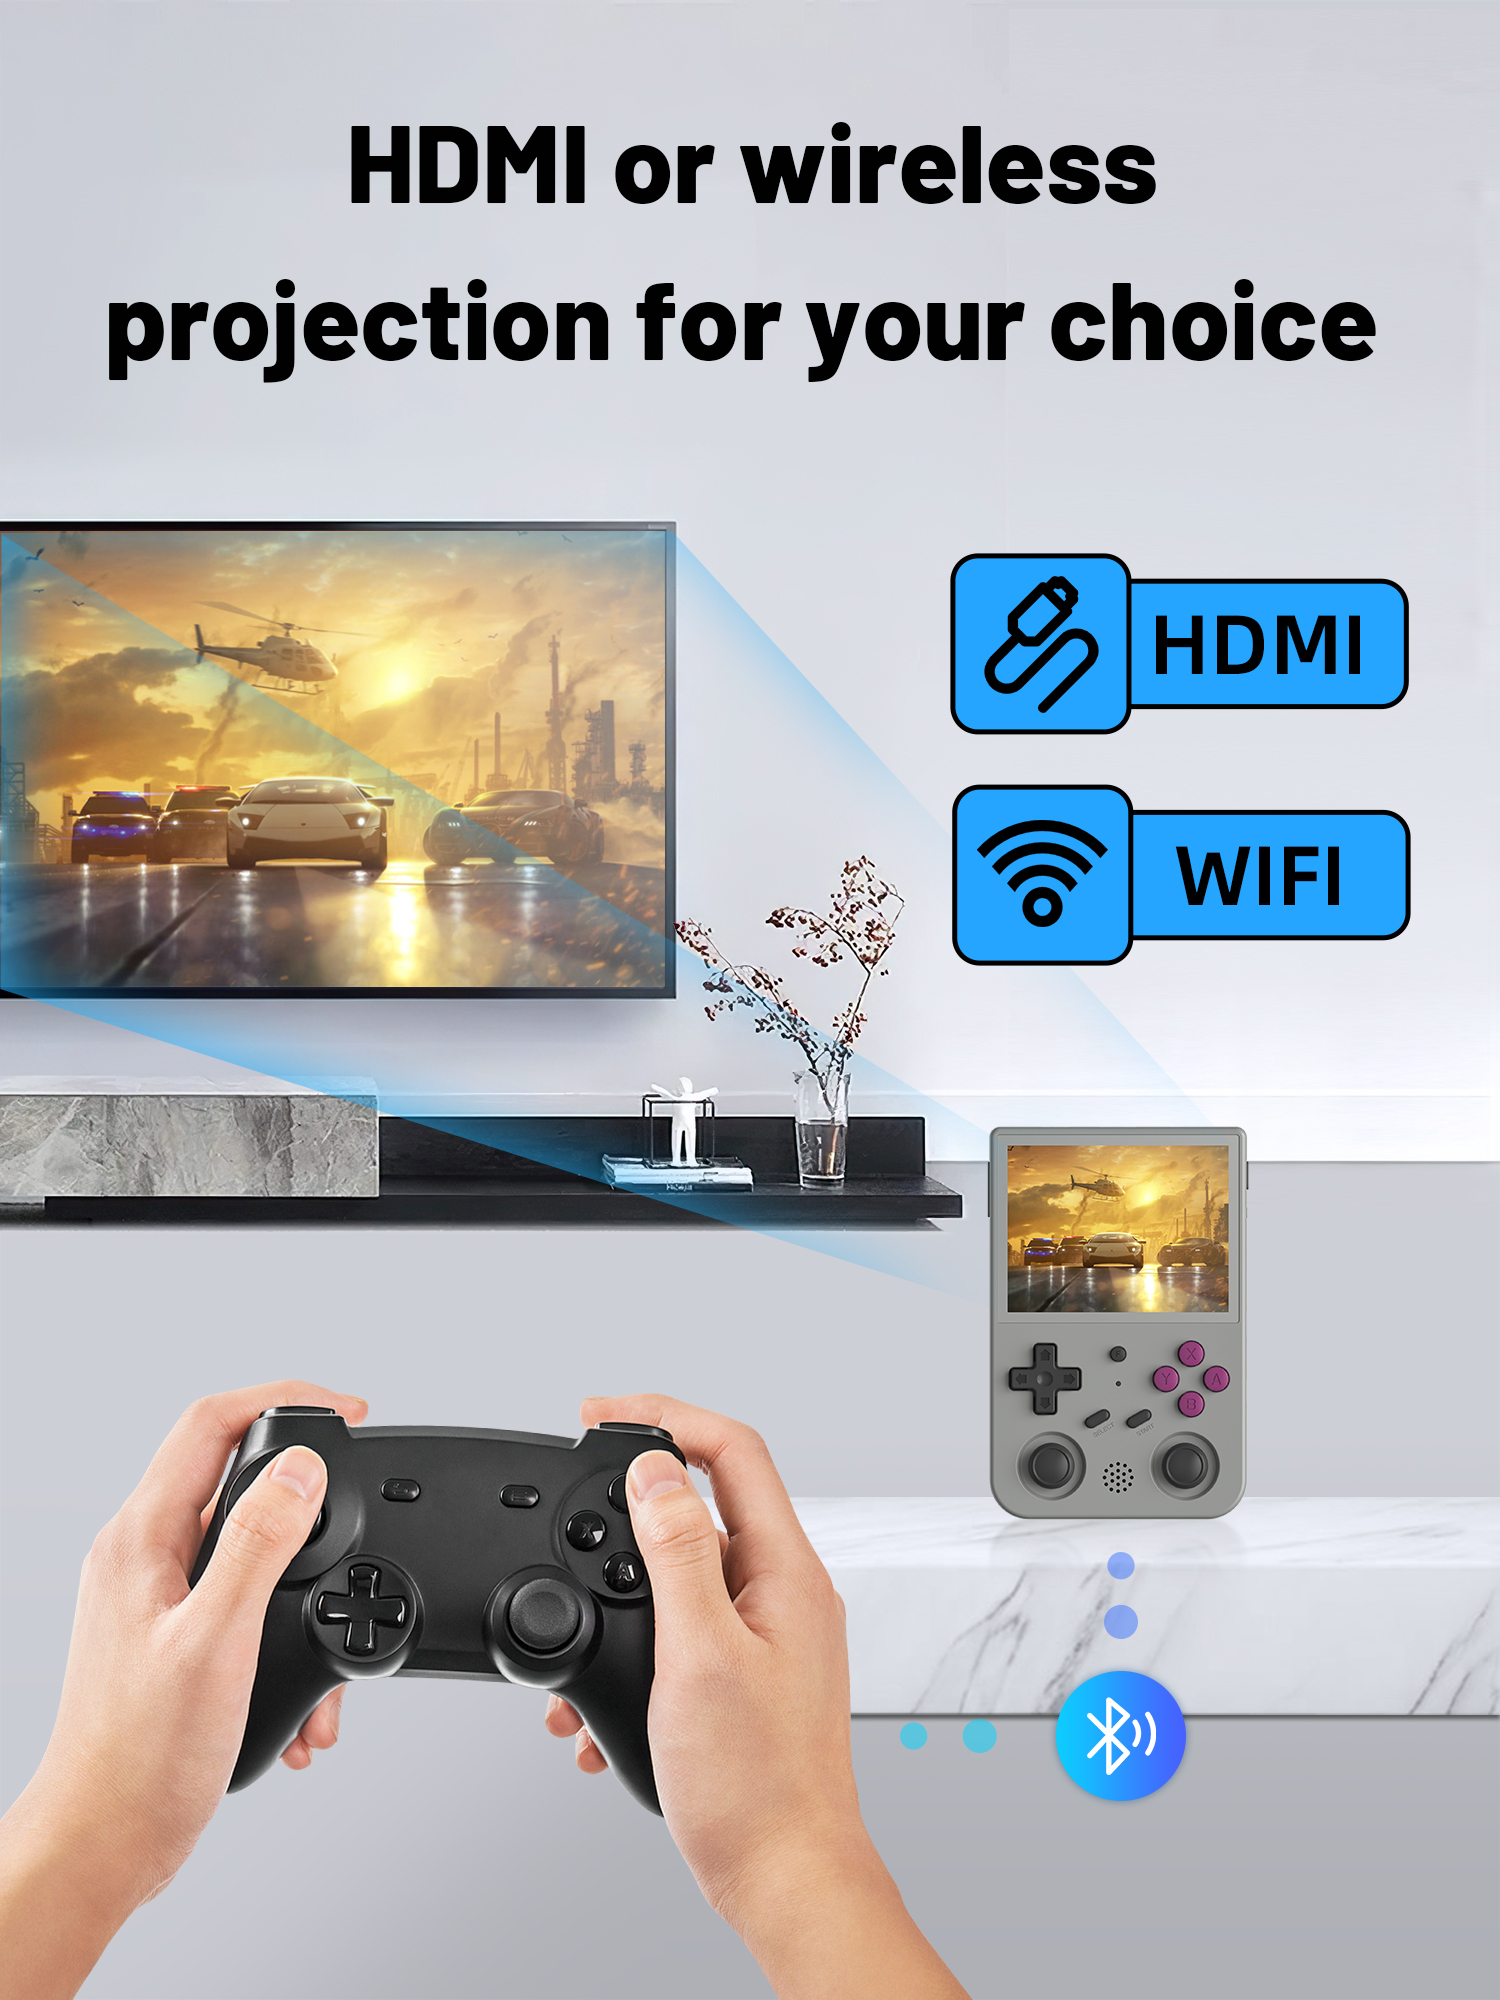 ANBERNIC RG353V 256GB 35000 Games Android Linux Dual OS Handheld Game Console LPDDR4 2GB RAM eMMC 5.1 32GB ROM 5G WiF BT4.2 3.5 inch IPS Full View Retro Video Game Player